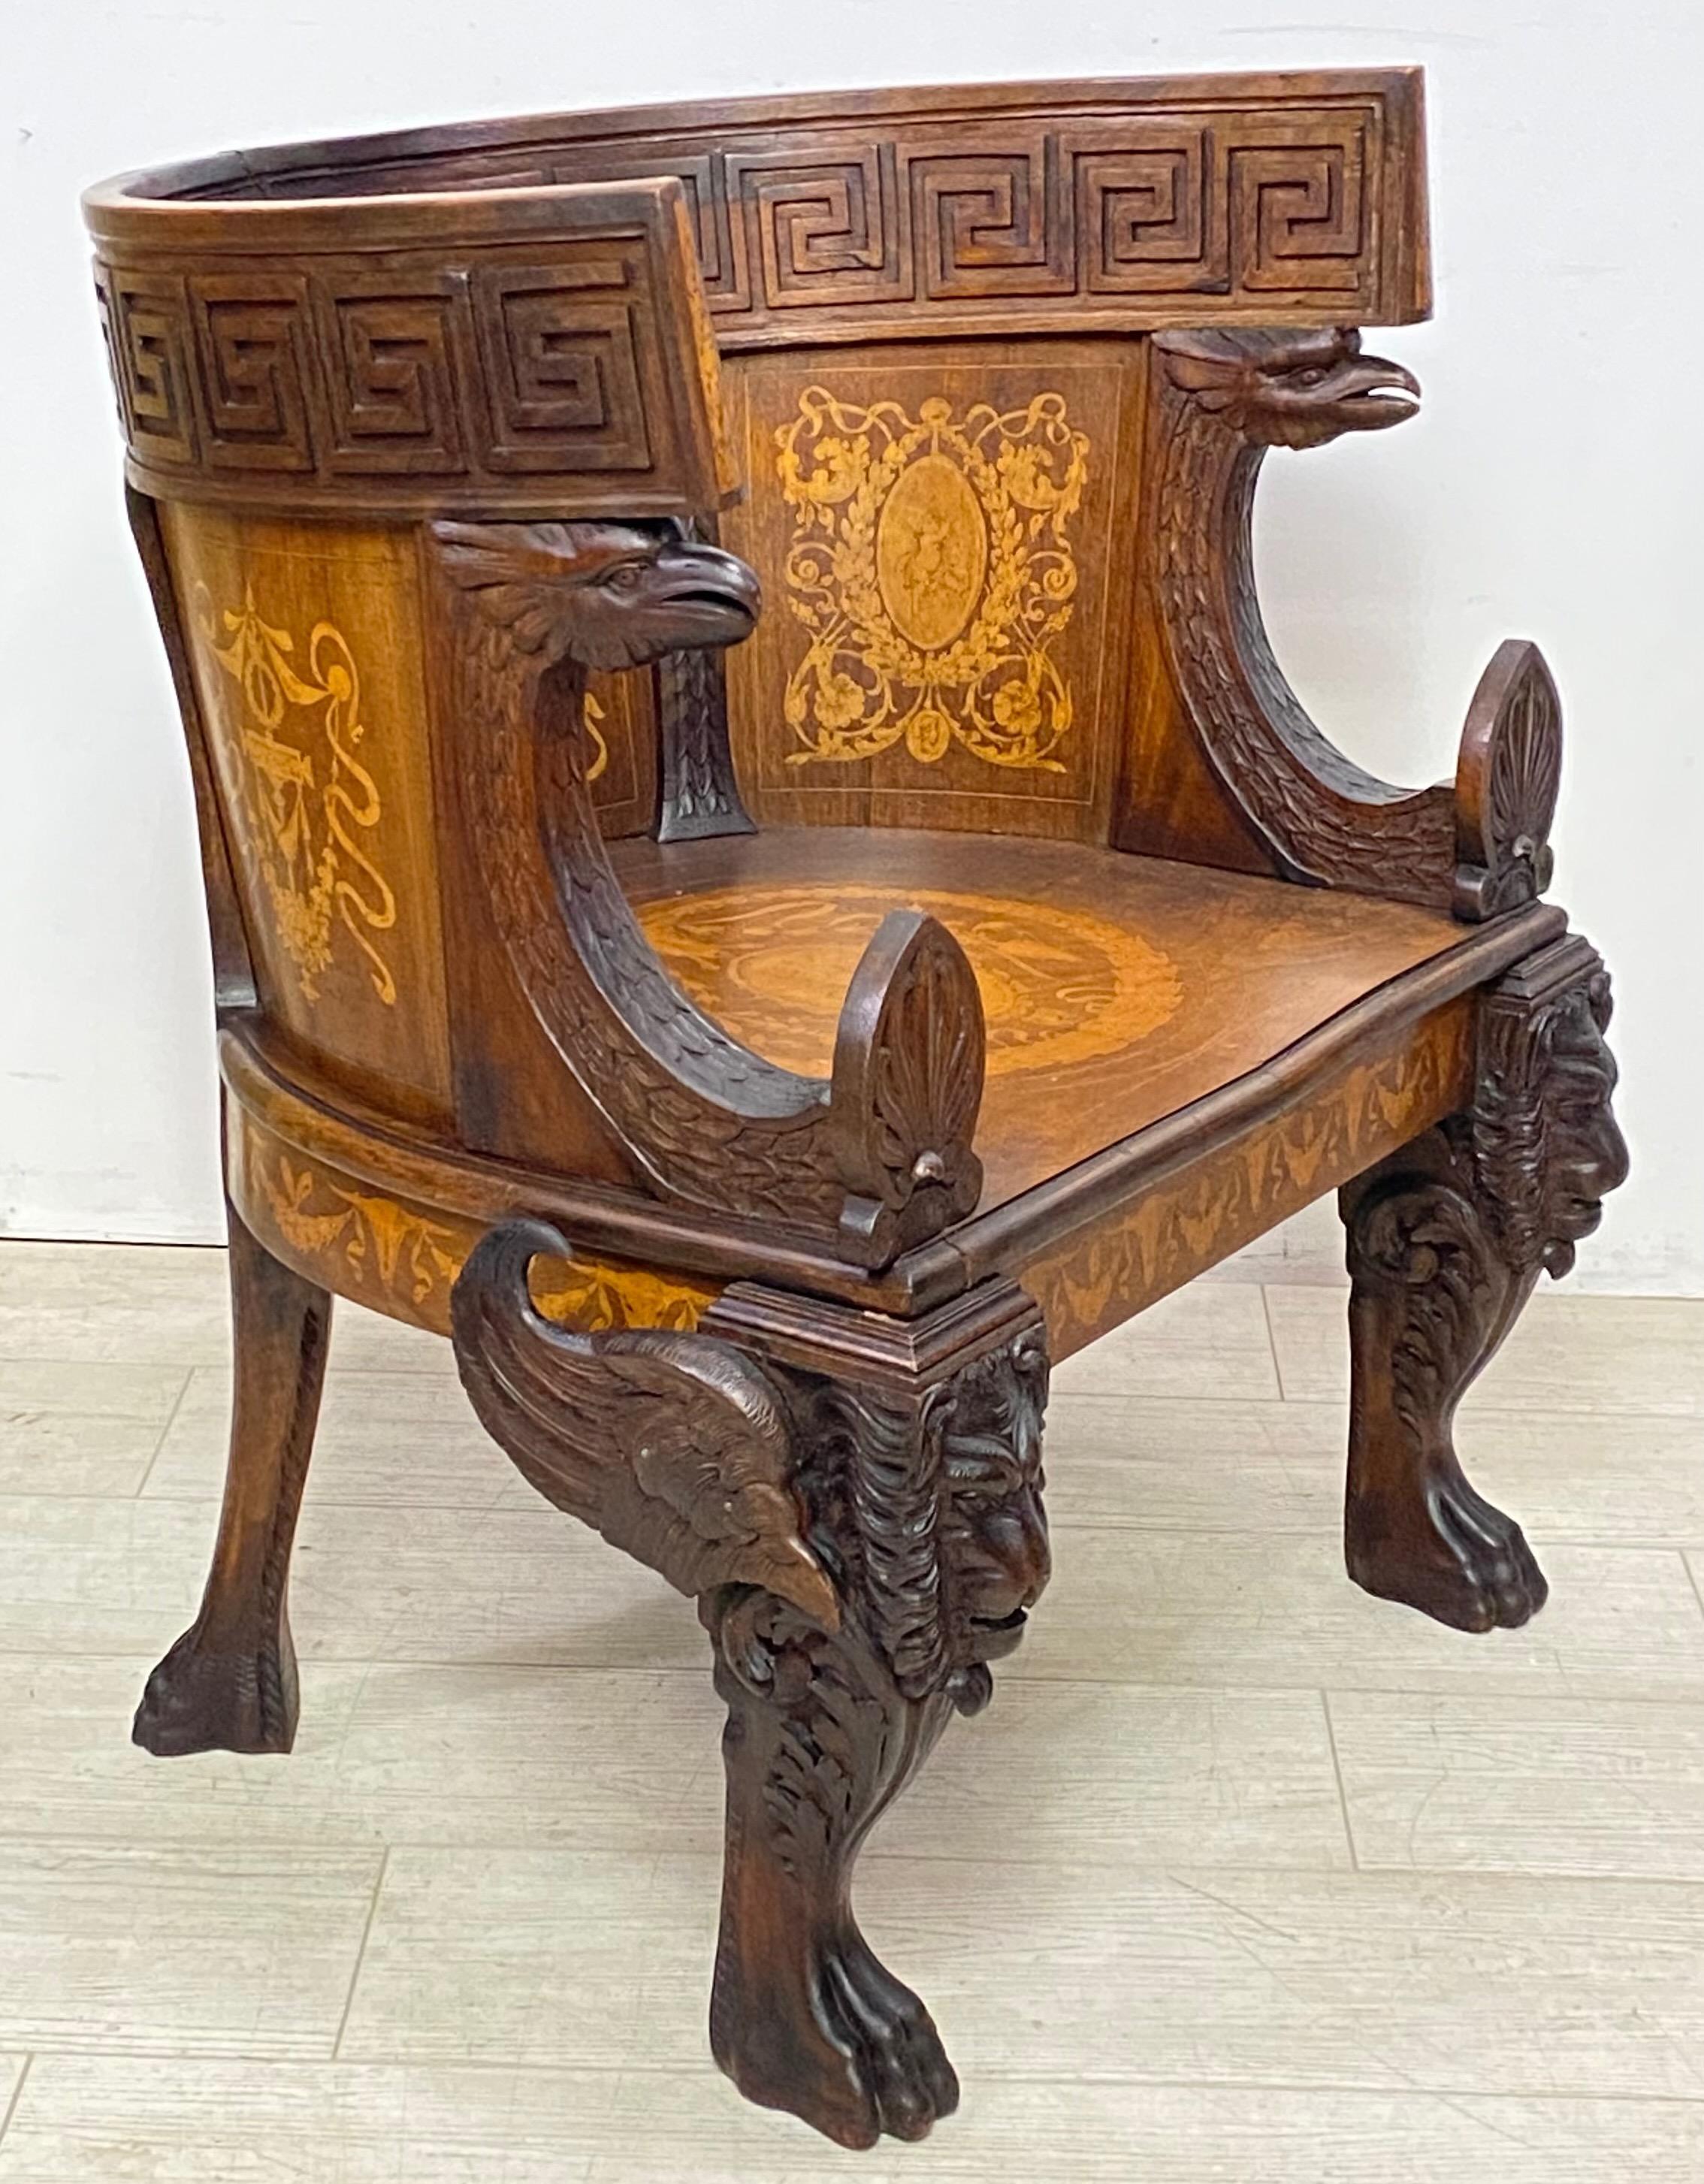 Neoclassical Revival Grand Tour Period Walnut Chair, Italian 19th Century In Good Condition For Sale In San Francisco, CA